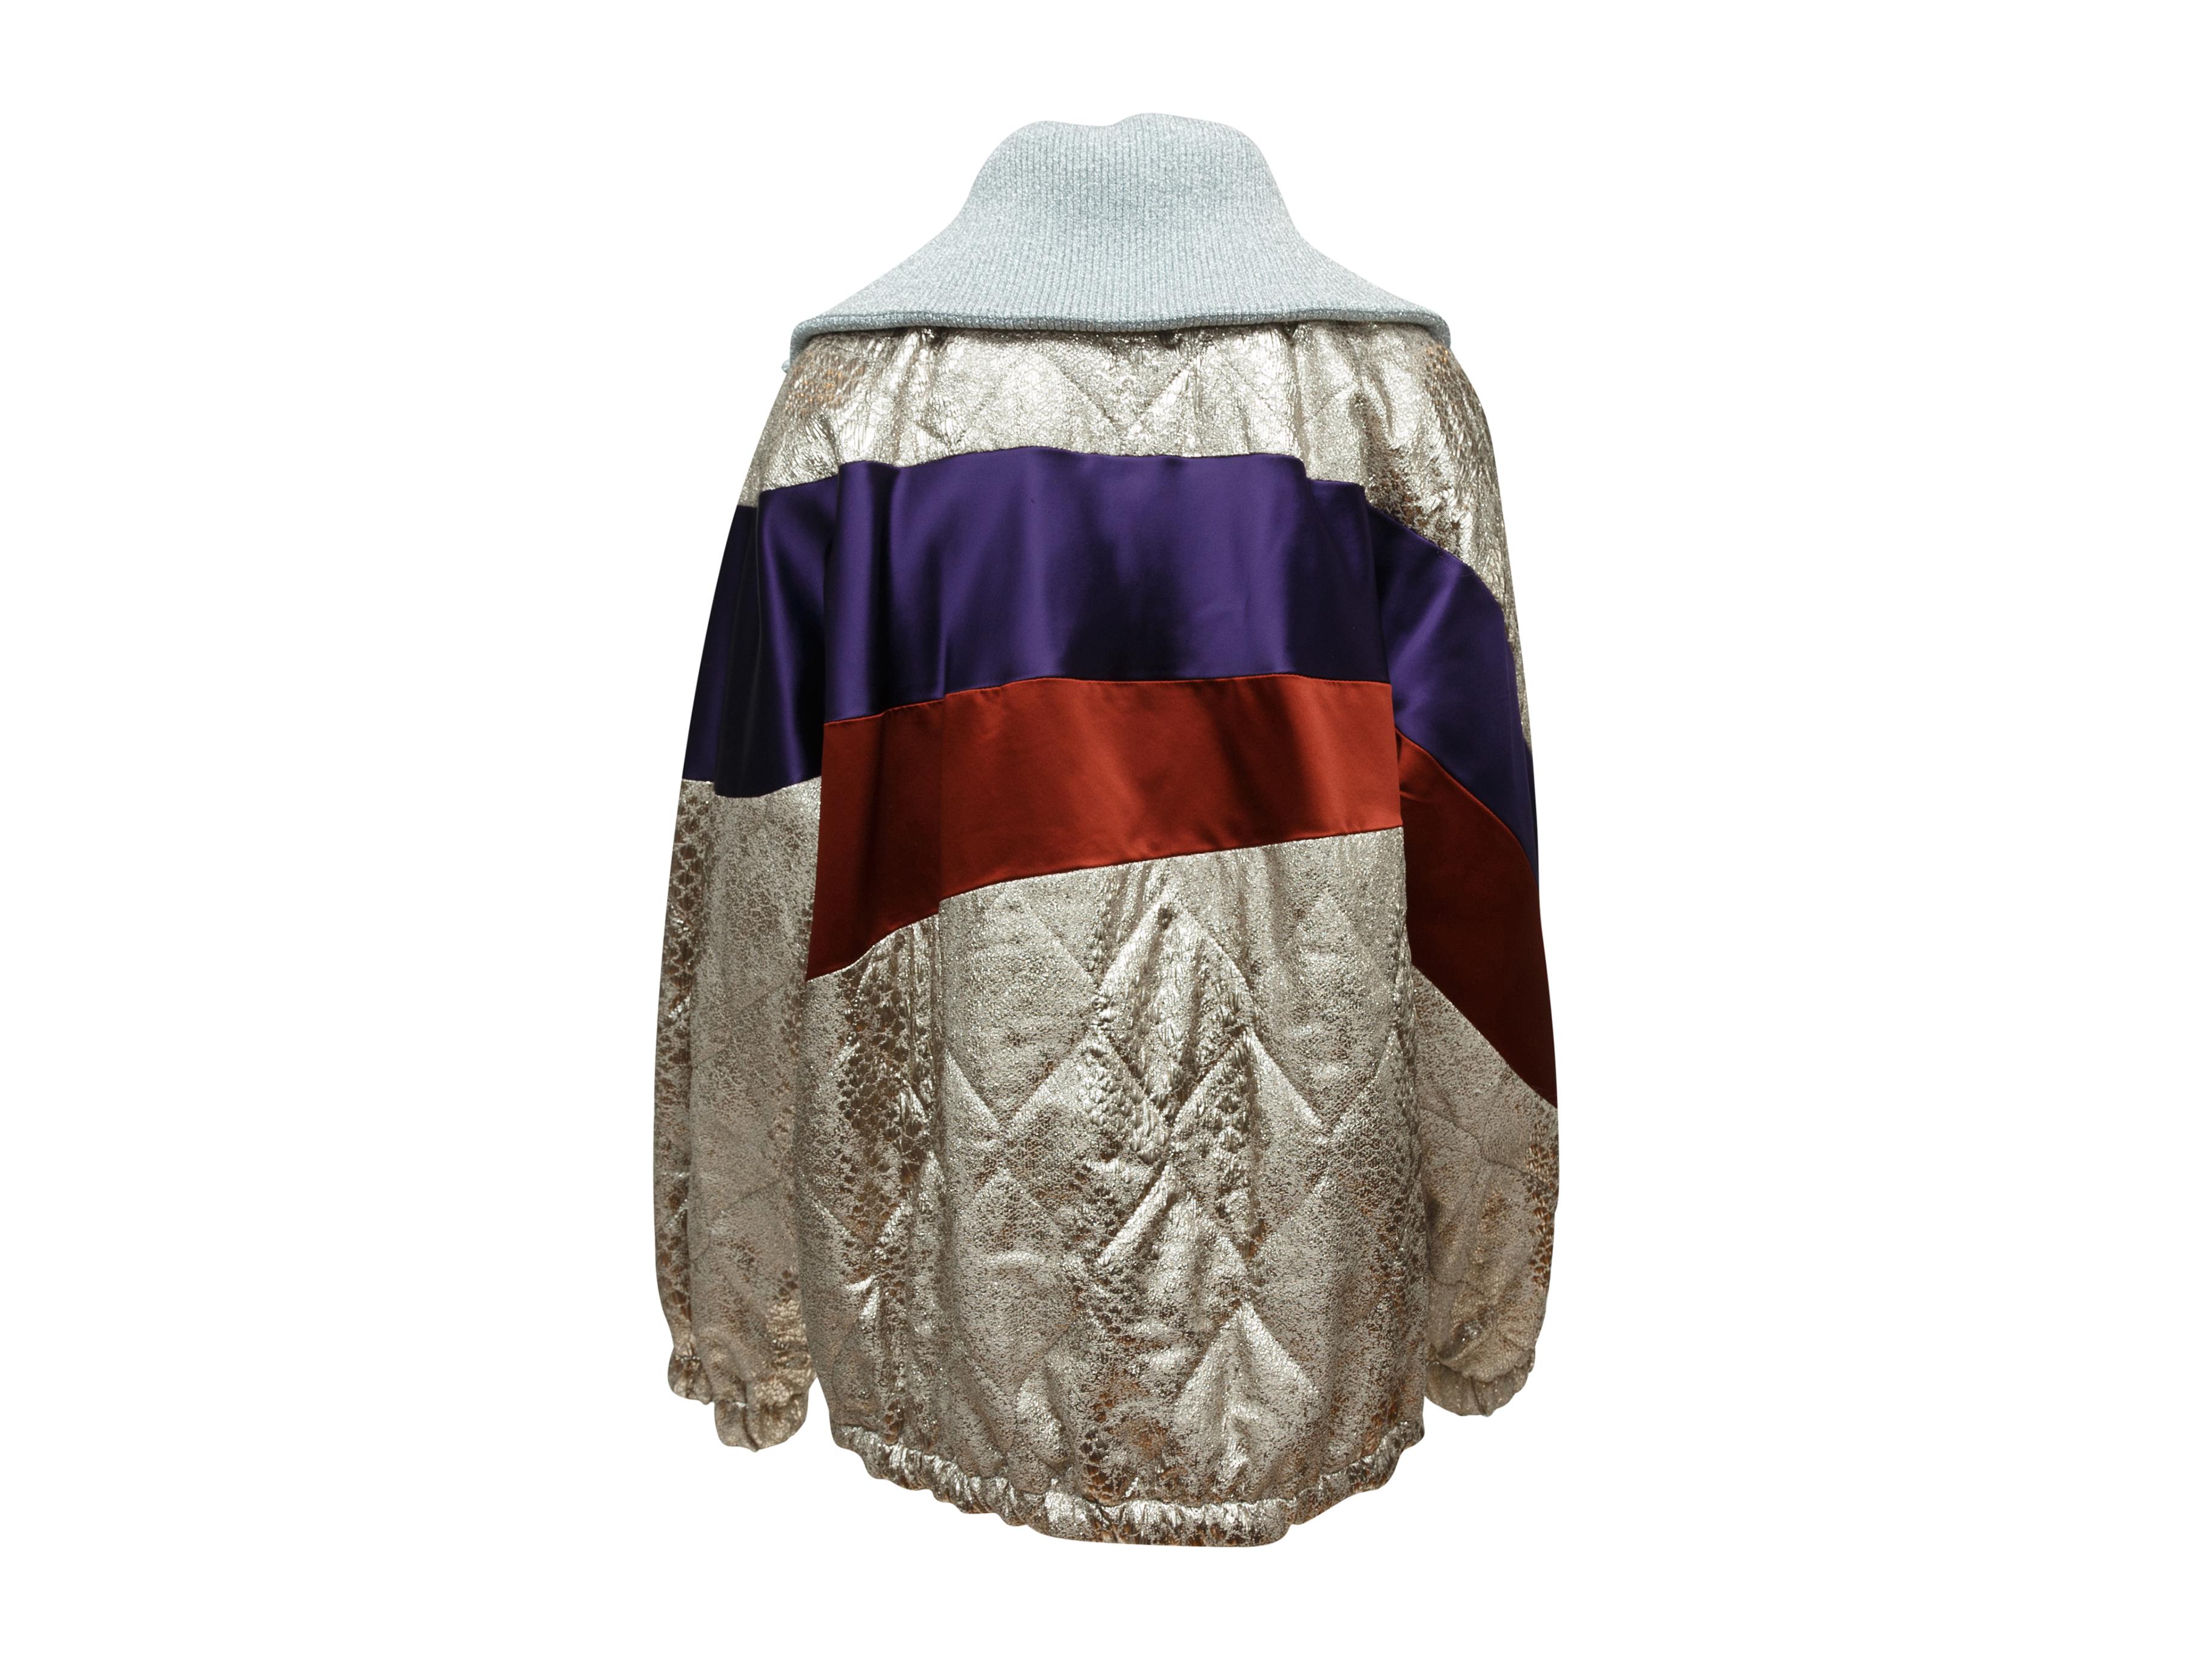 Product details: Metallic silver, red and purple satin bomber jacket by Dries Van Noten. Oversize collar. Drawstring at hem. Zip closure at center front. 44